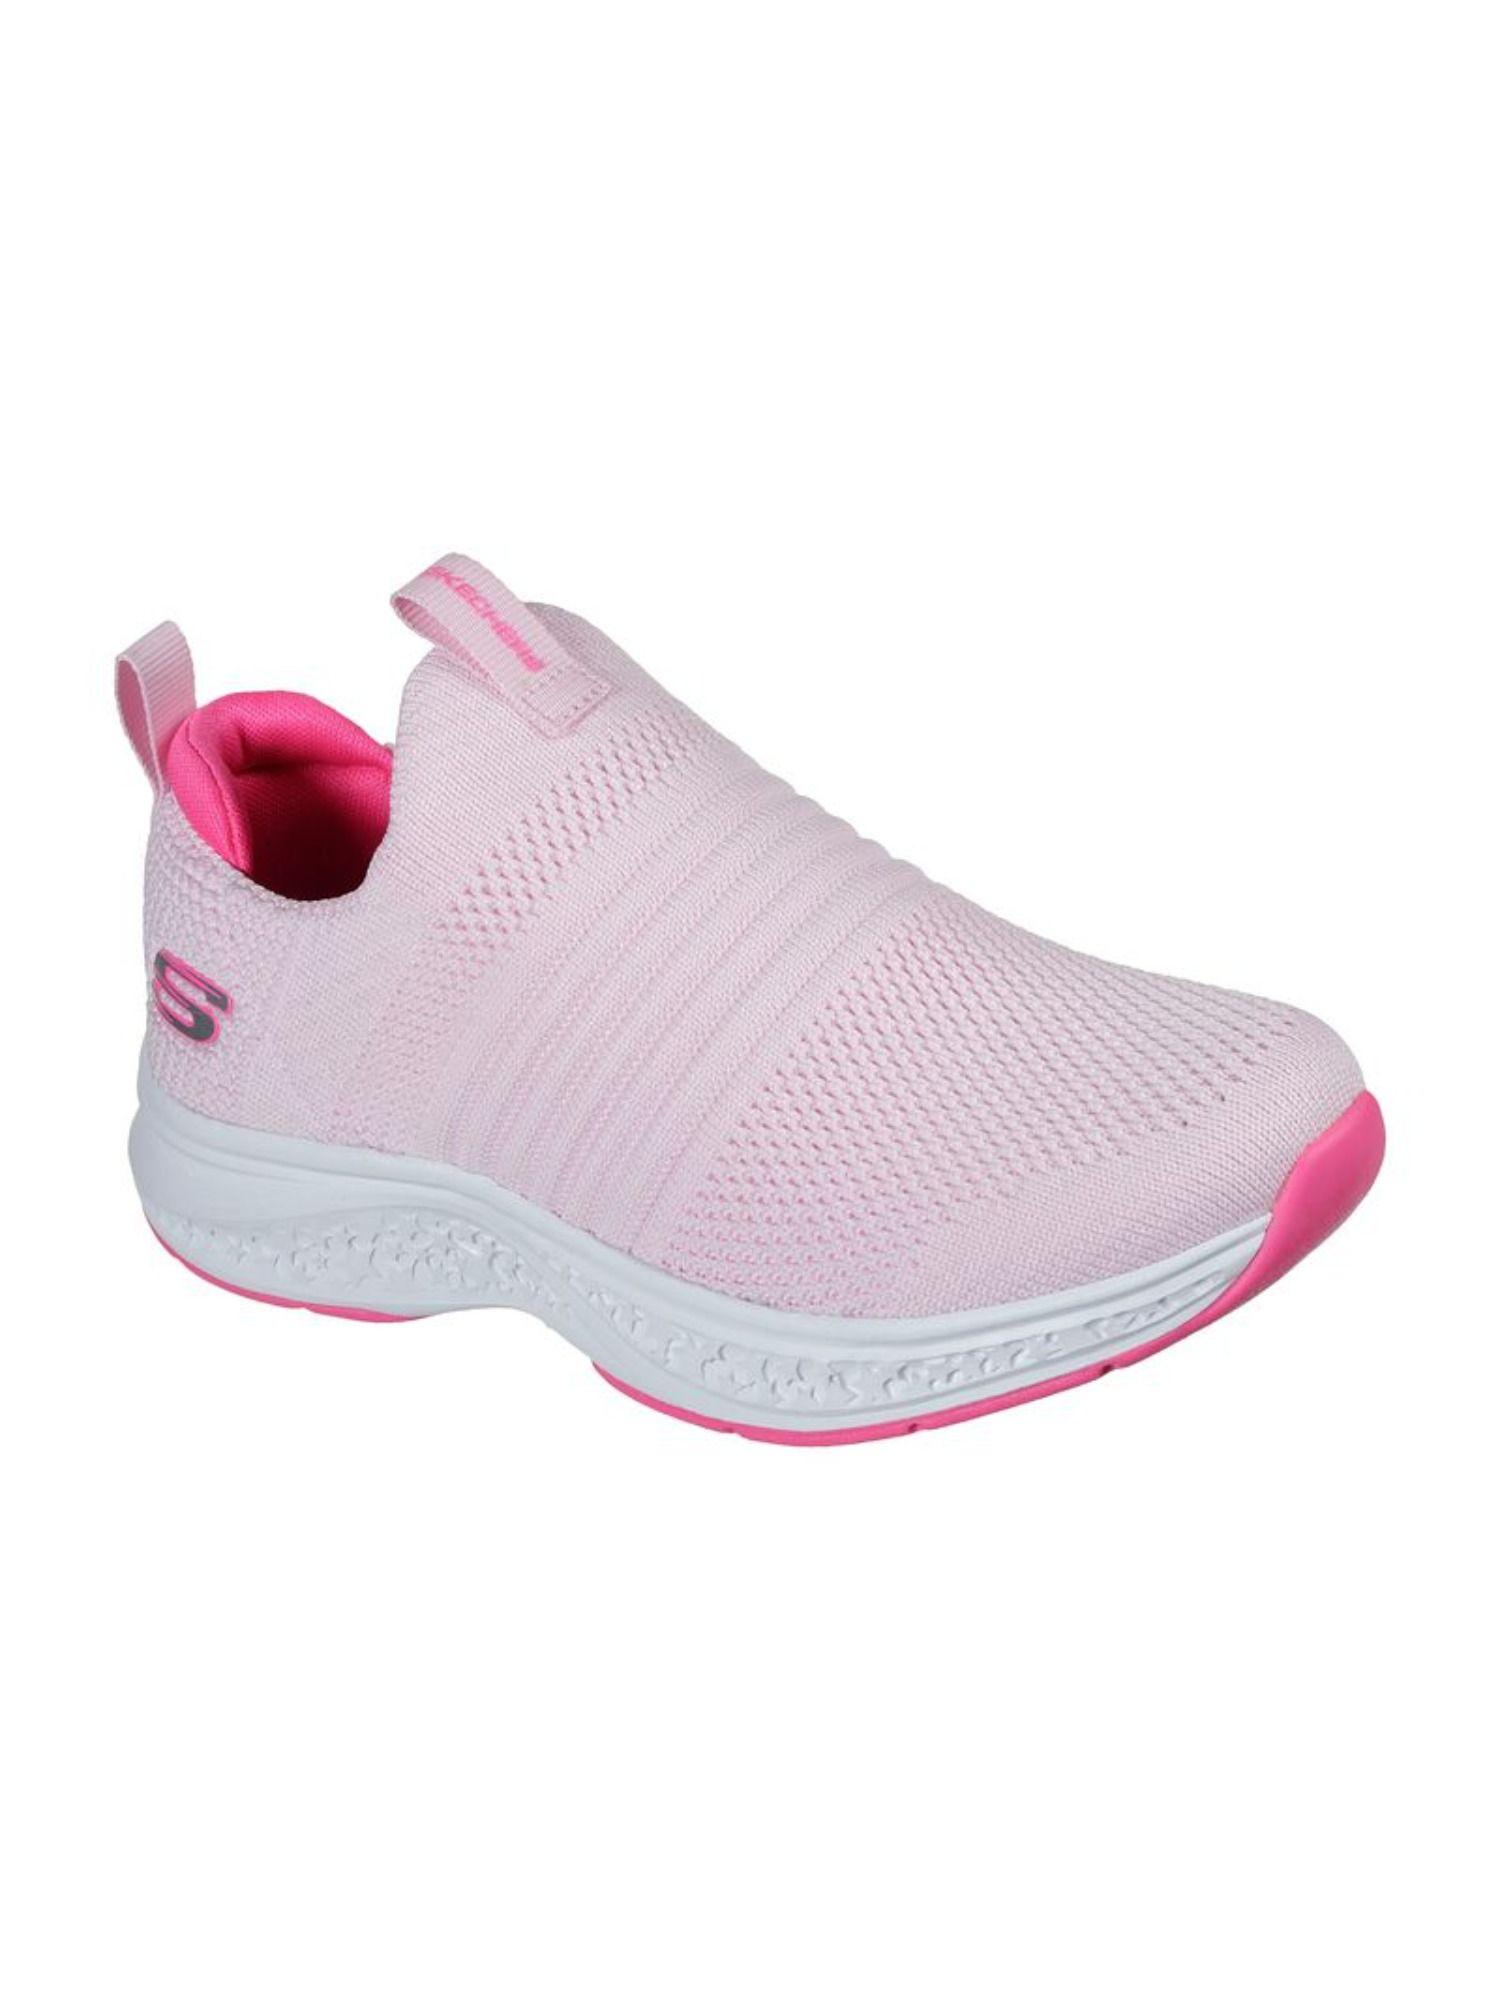 girls star speeder - sweet vision pink casual shoes